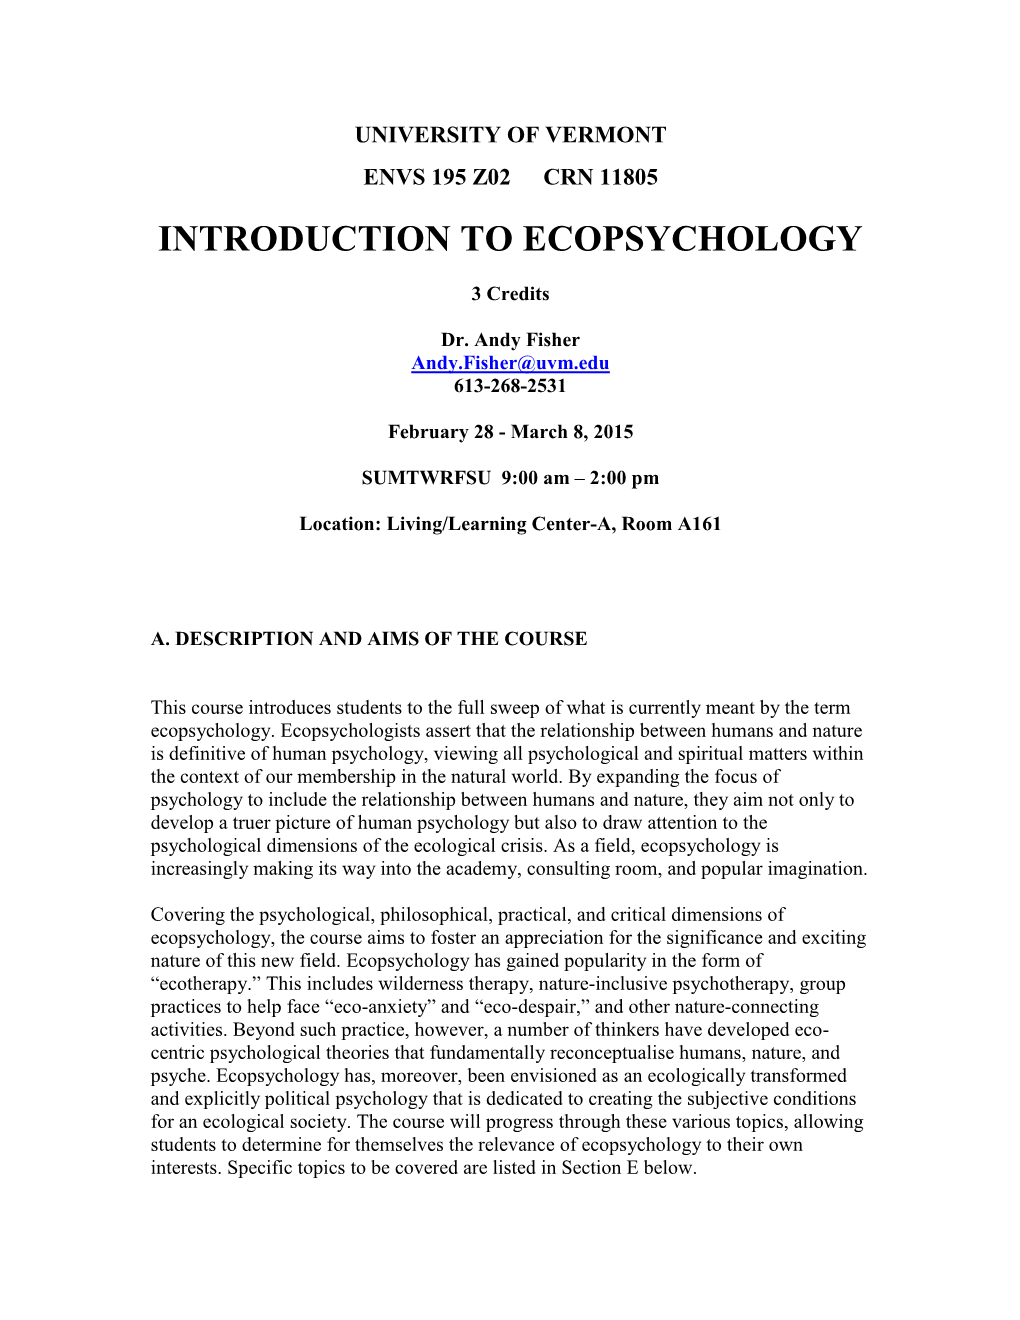 Introduction to Ecopsychology